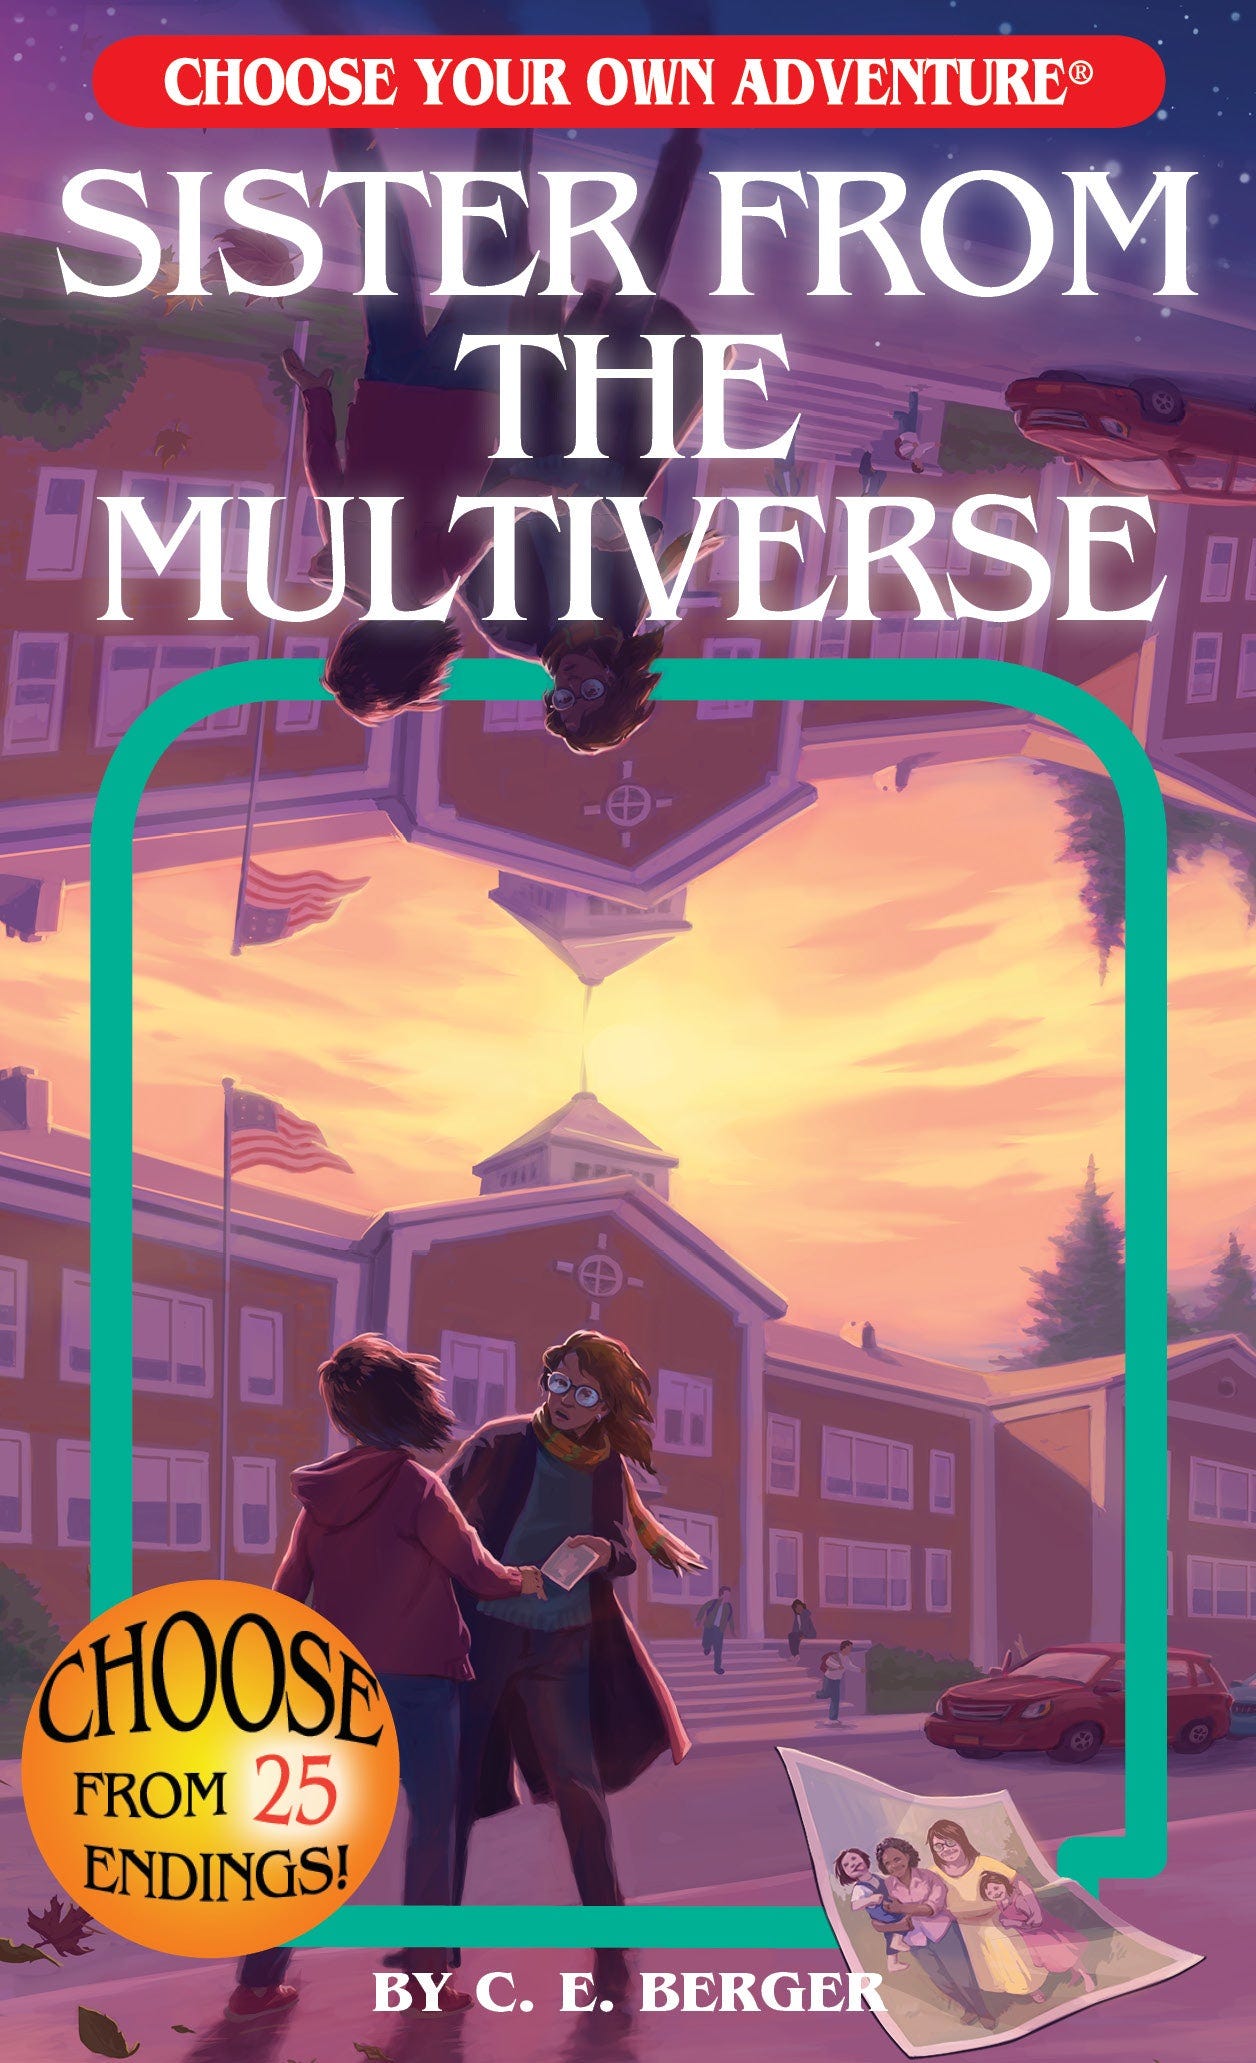 Book cover of “Sister From the Multiverse” by C. E. Berger. Two young women talking outside of a school with a mirrored image of them upside down at the top of the cover.